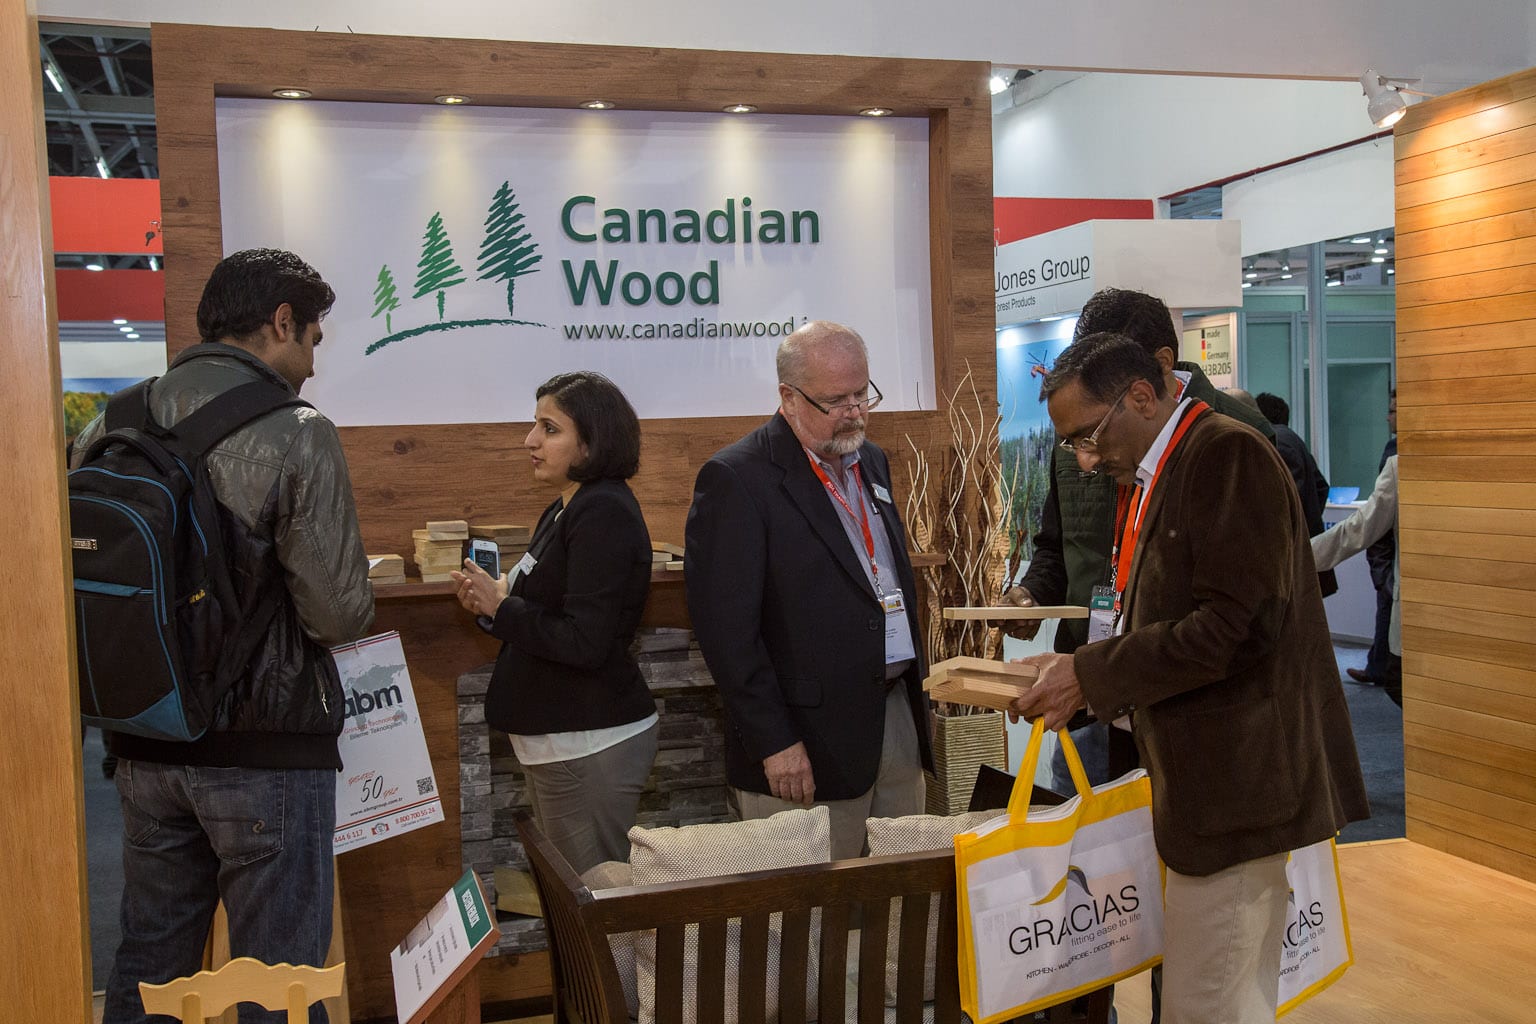 B.C. profile high at Indian trade event